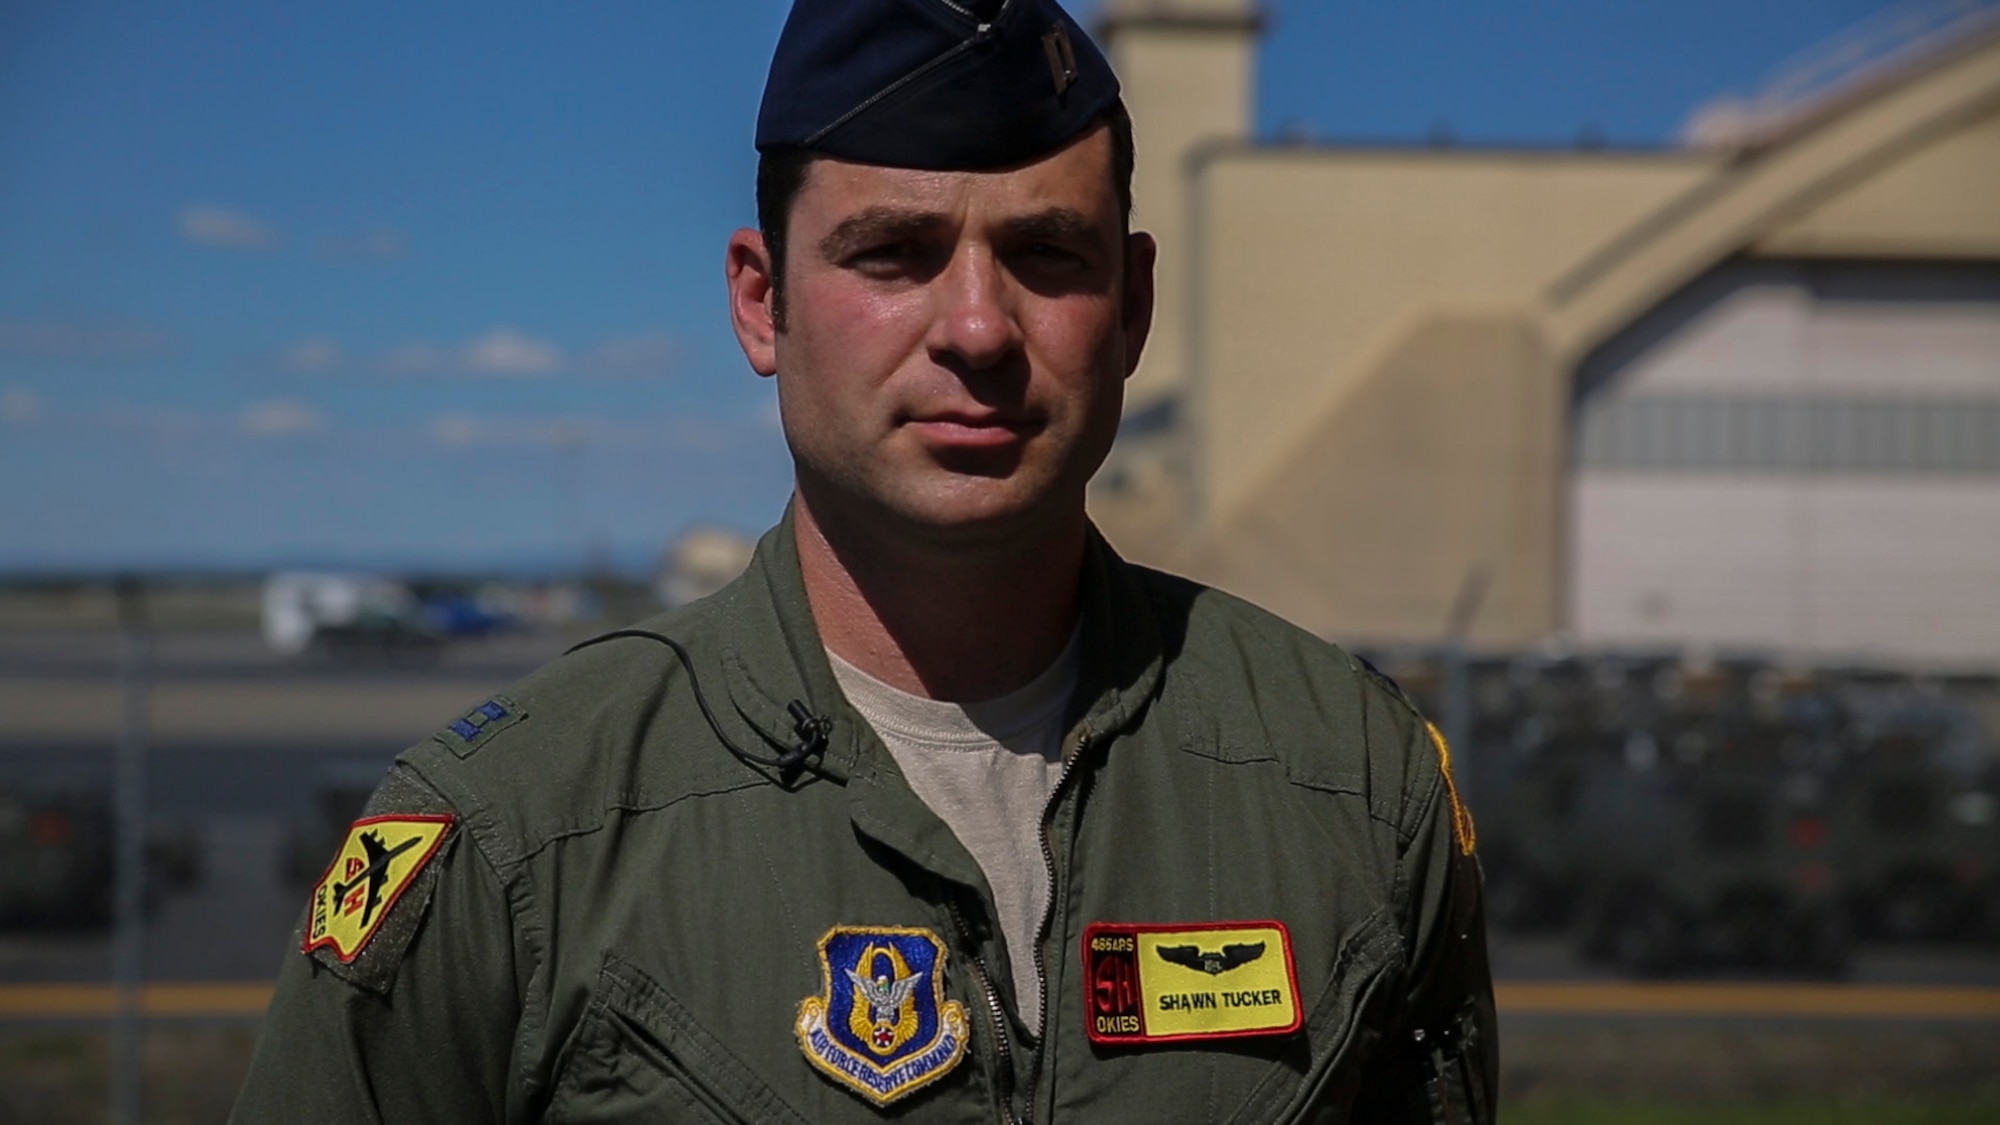 U.S. Air Force Capt. Shawn R. Tucker, a Skiatook, Oklahoma, native, currently a KC-135 Stratotanker pilot with the 465th Air Refueling Squadron, participates in Exercise Northern Edge 2015, June 18, 2015. Northern Edge 2015 is Alaska’s premier joint training exercise designed to practice operations, tactics, techniques and procedures as well as enhance interoperability among the services. Thousands of Airmen, Soldiers, Sailors, Marines and Coast Guardsmen from active duty, reserve and National Guard units, including Tucker’s unit, the 507th Air Refueling Wing out of Tinker Air Force Base, Oklahoma, are involved. (U.S. Marine Corps photo by Cpl. Thor J. Larson/Released)